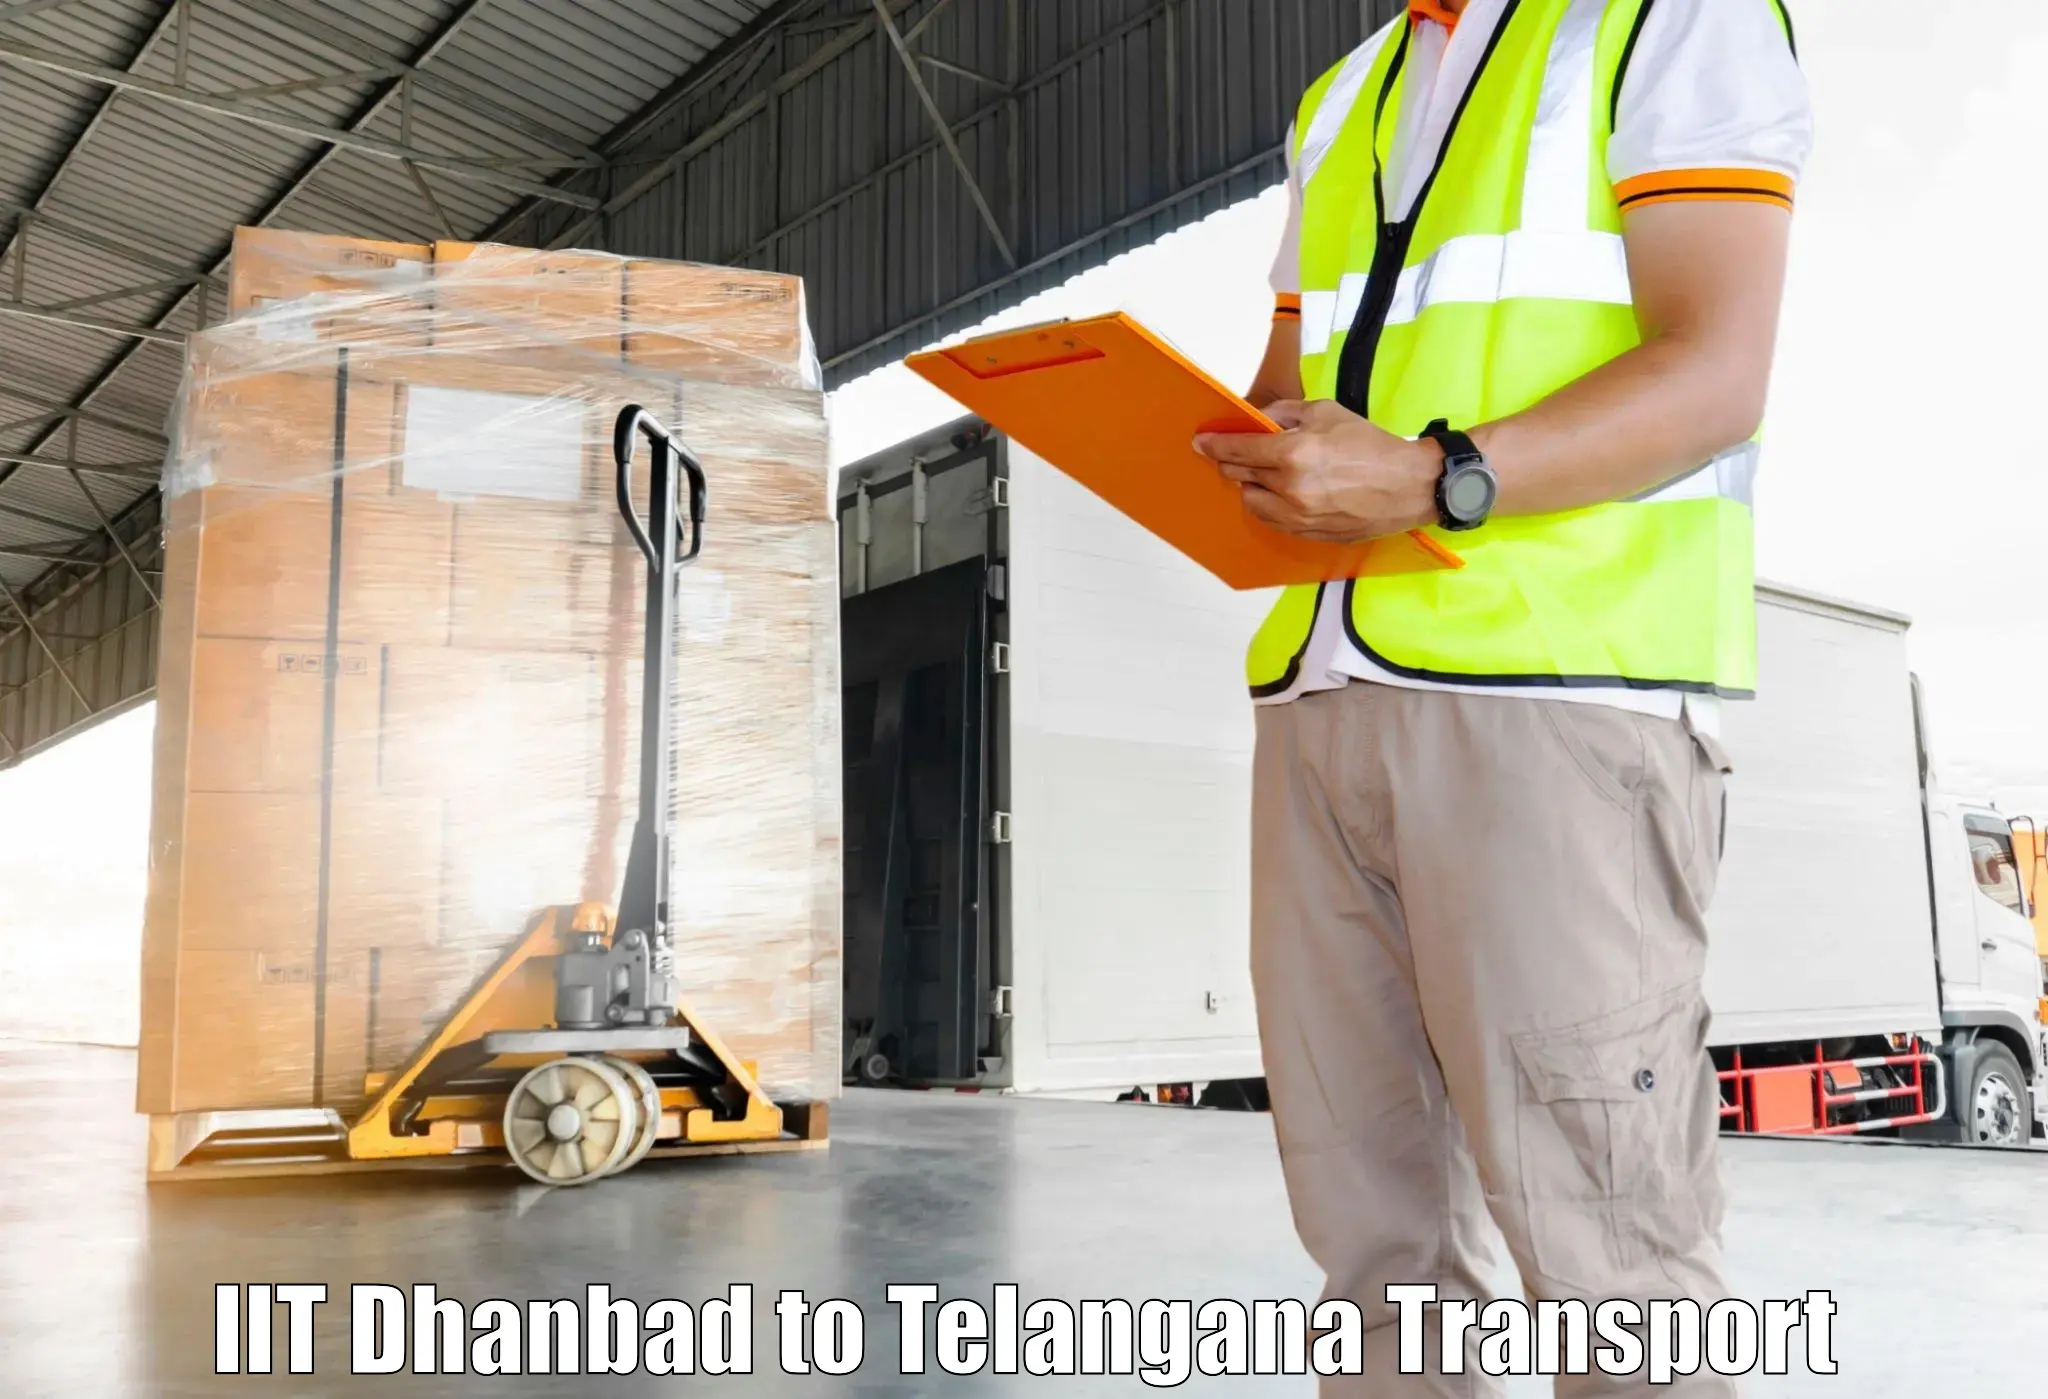 Air freight transport services IIT Dhanbad to Shamshabad